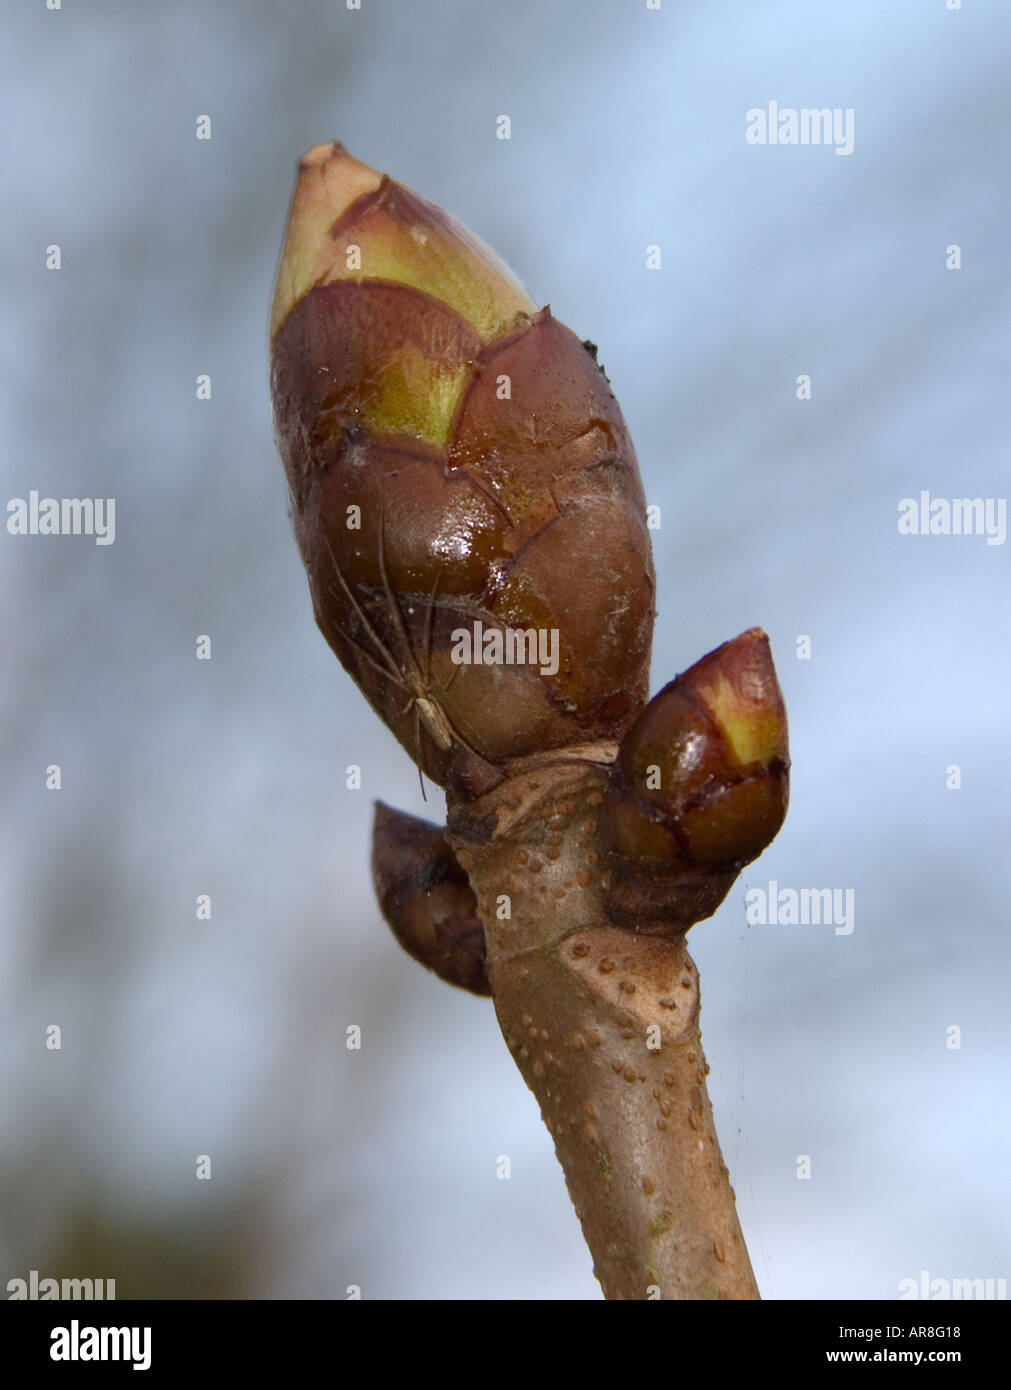 Aracnid Spider hiding underneath a bud on a tree branch Stock Photo